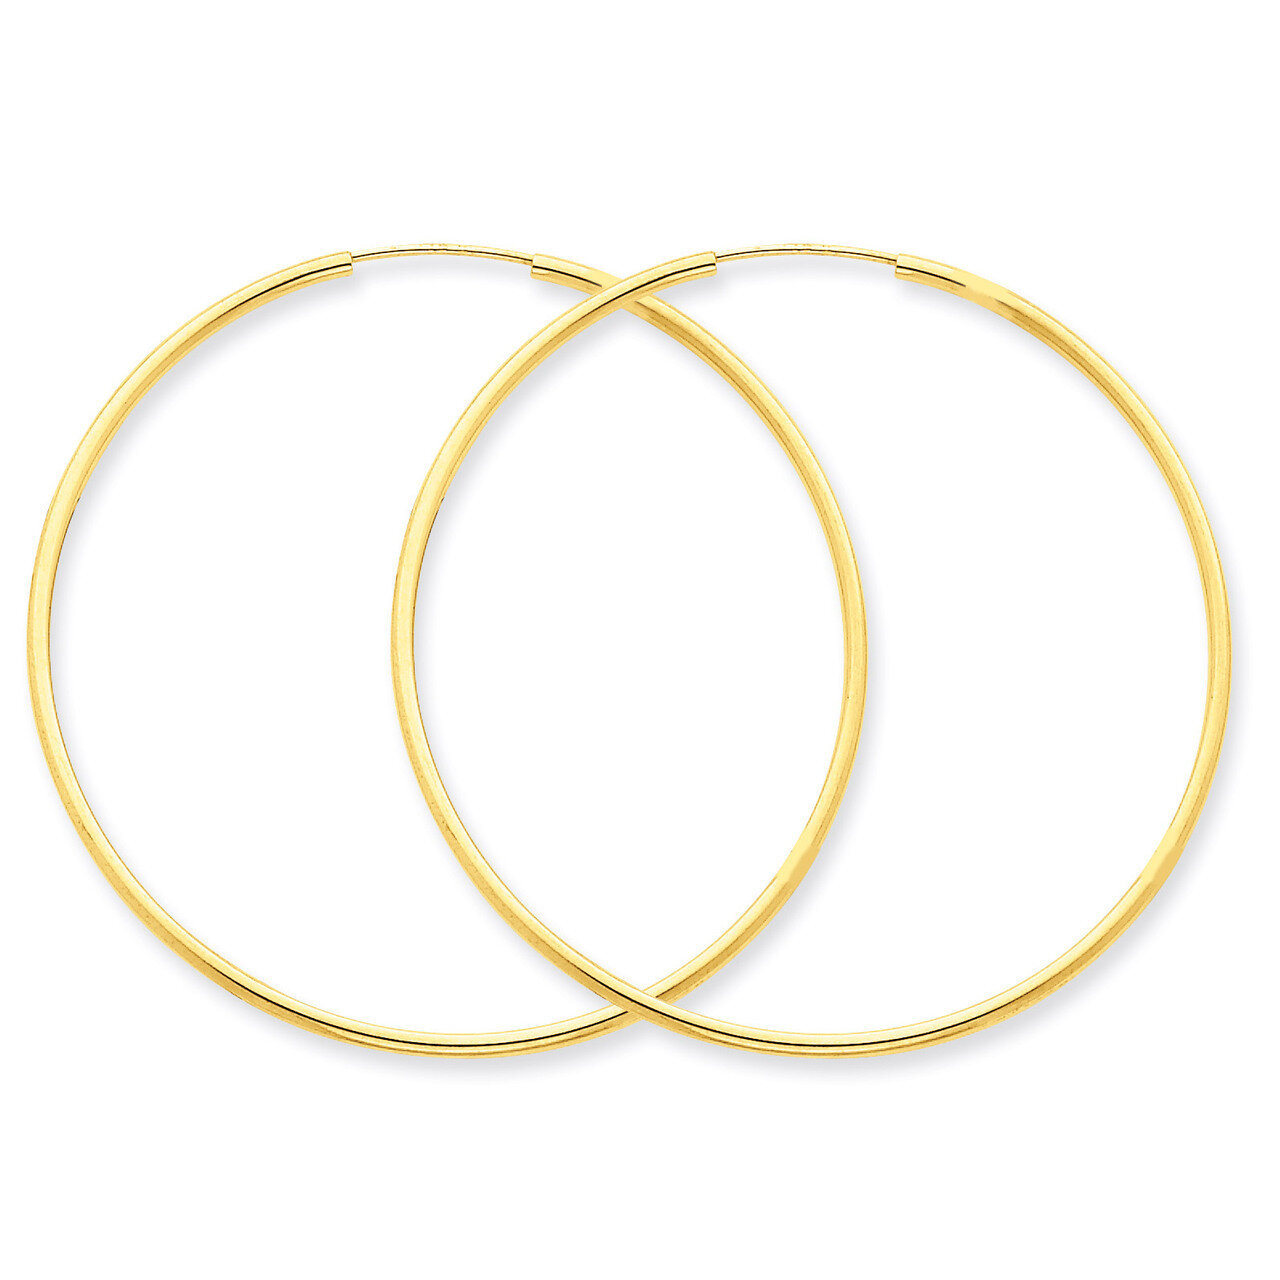 1.5mm Polished Round Endless Hoop Earrings 14k Gold XY1165